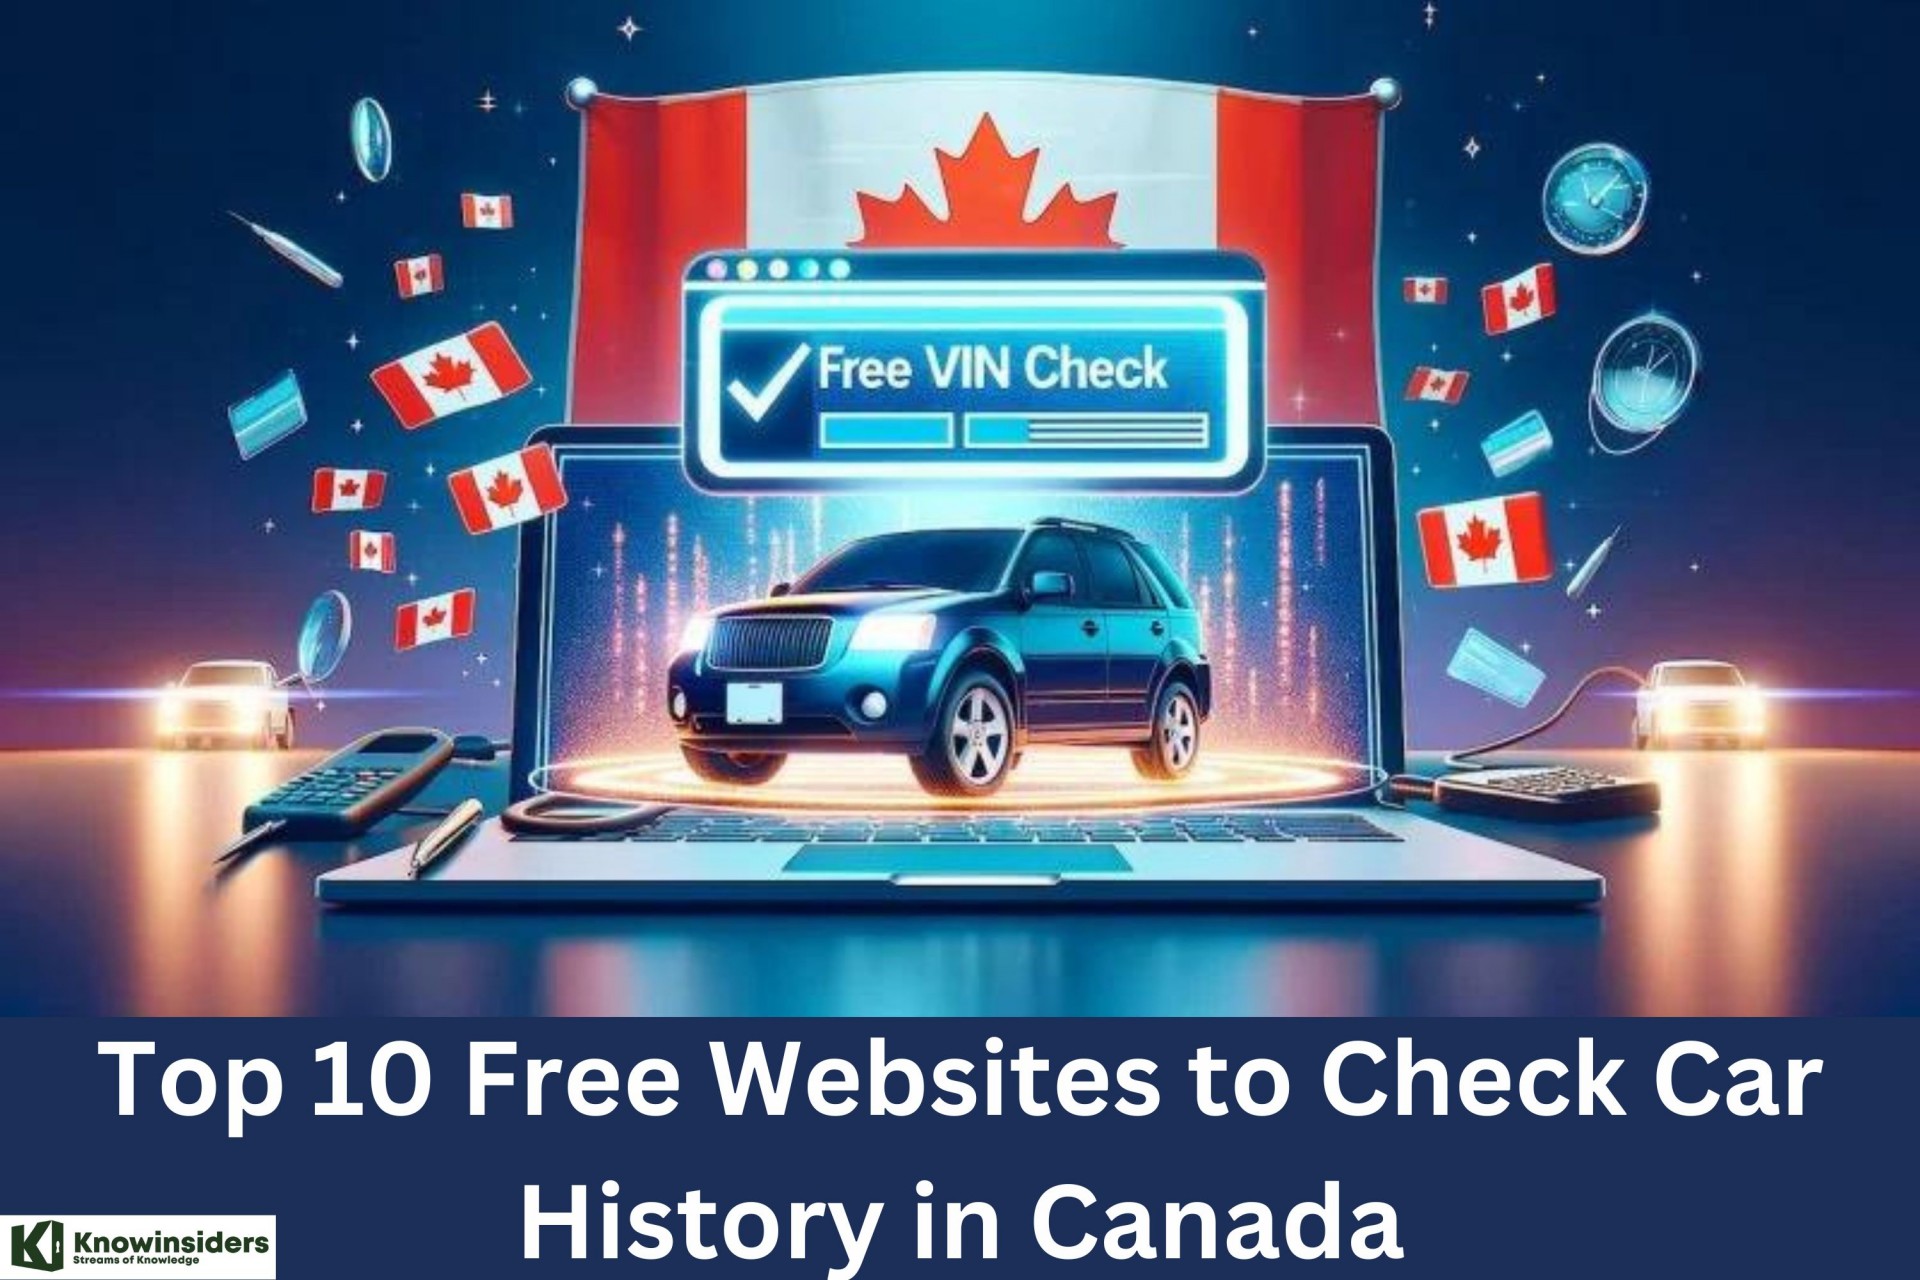 How Check A Car History in Canada - Top 10 Free Sites to Find the VIN